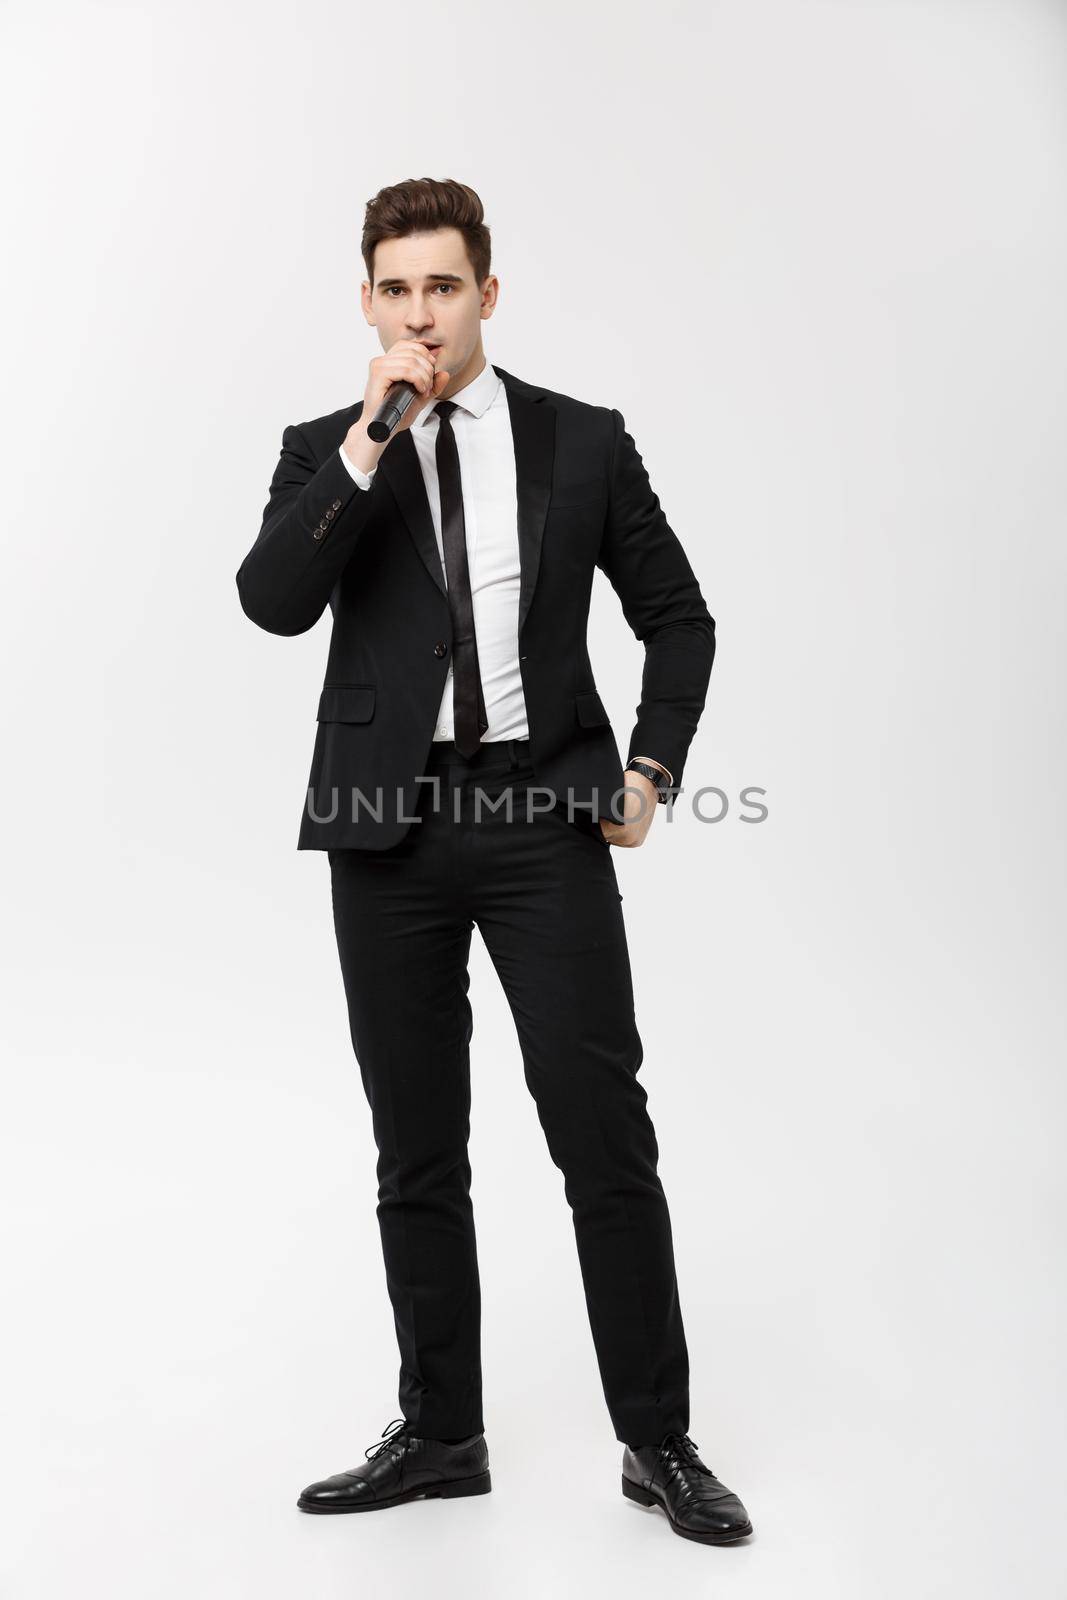 Business Concept: Full-length Portrait young man in black suit is holding a microphone, singing and posing against a white background.